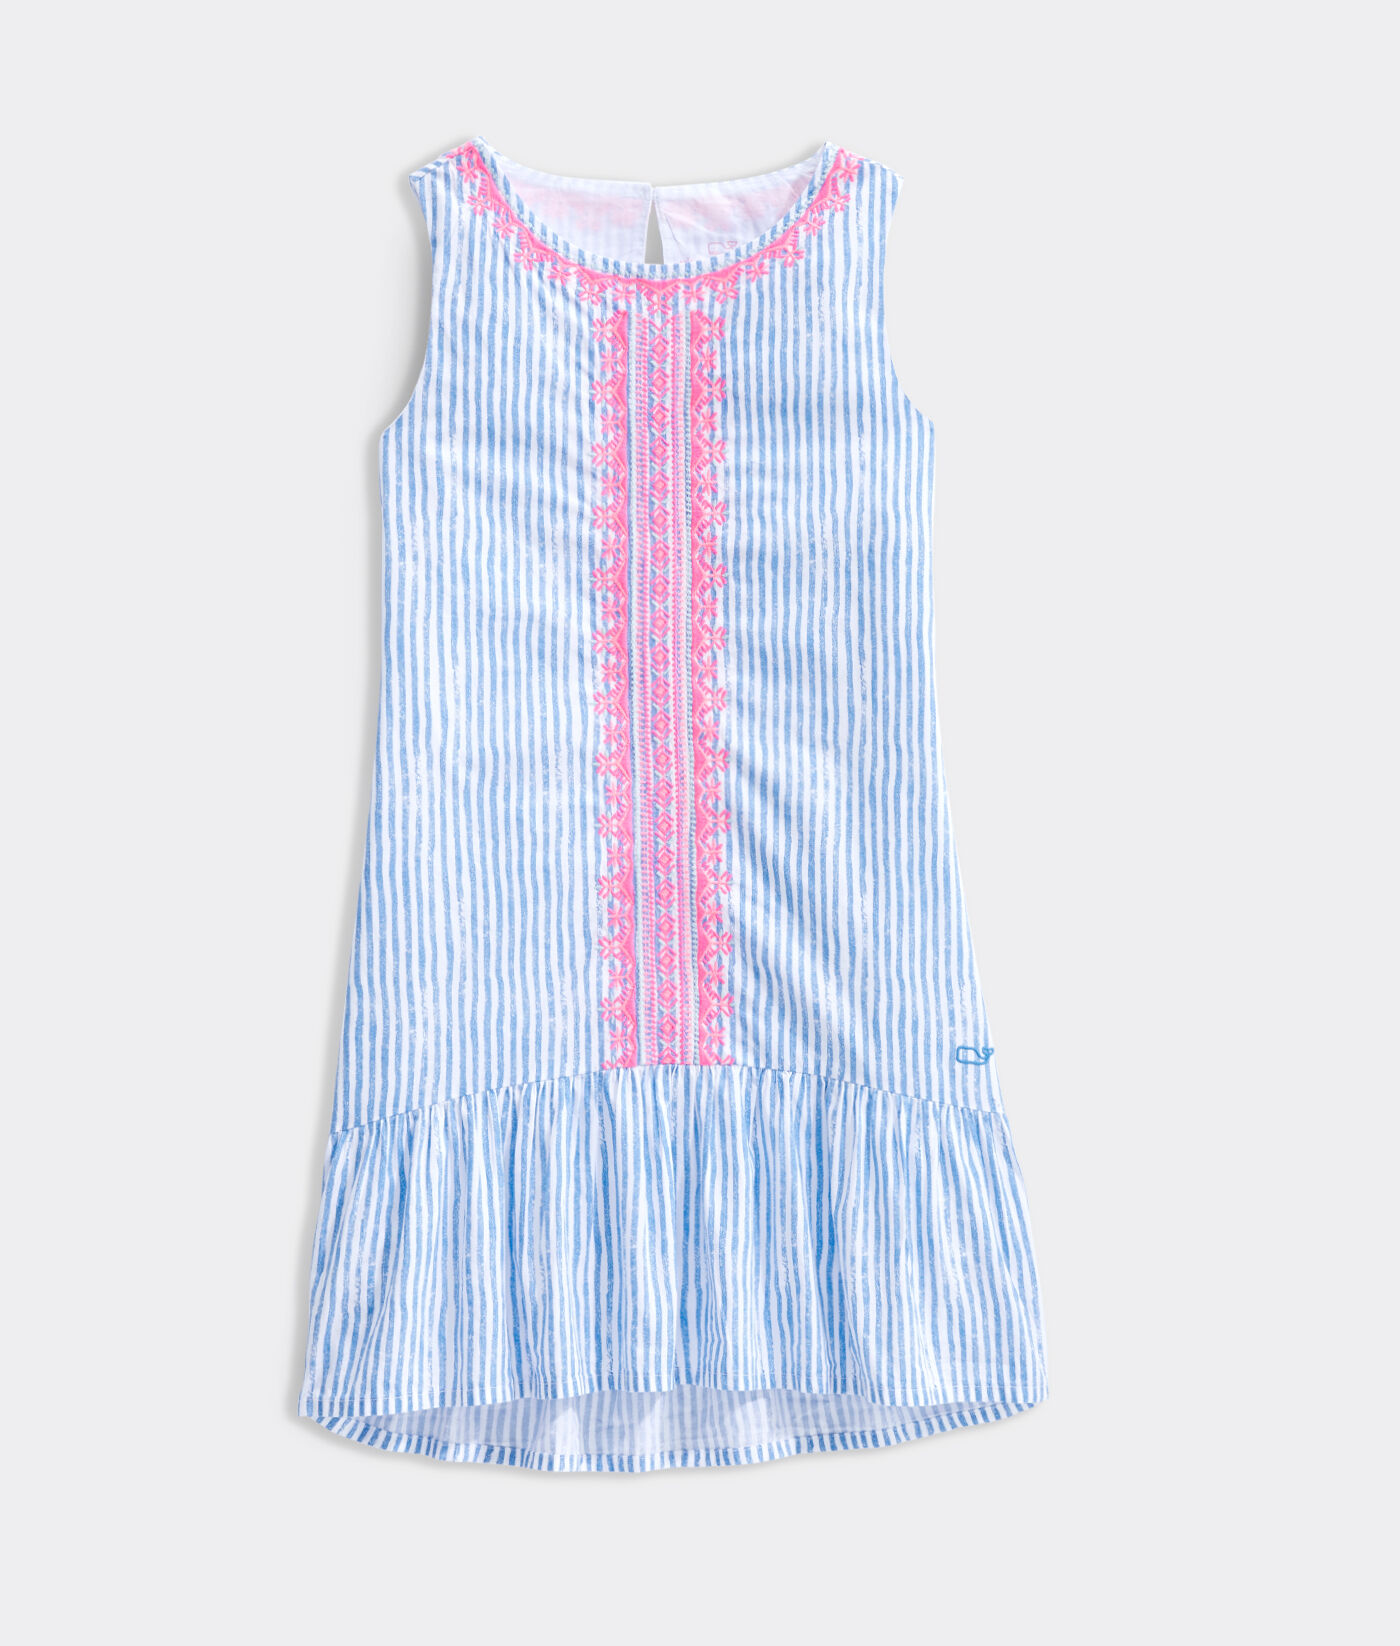 girls embroidered dress